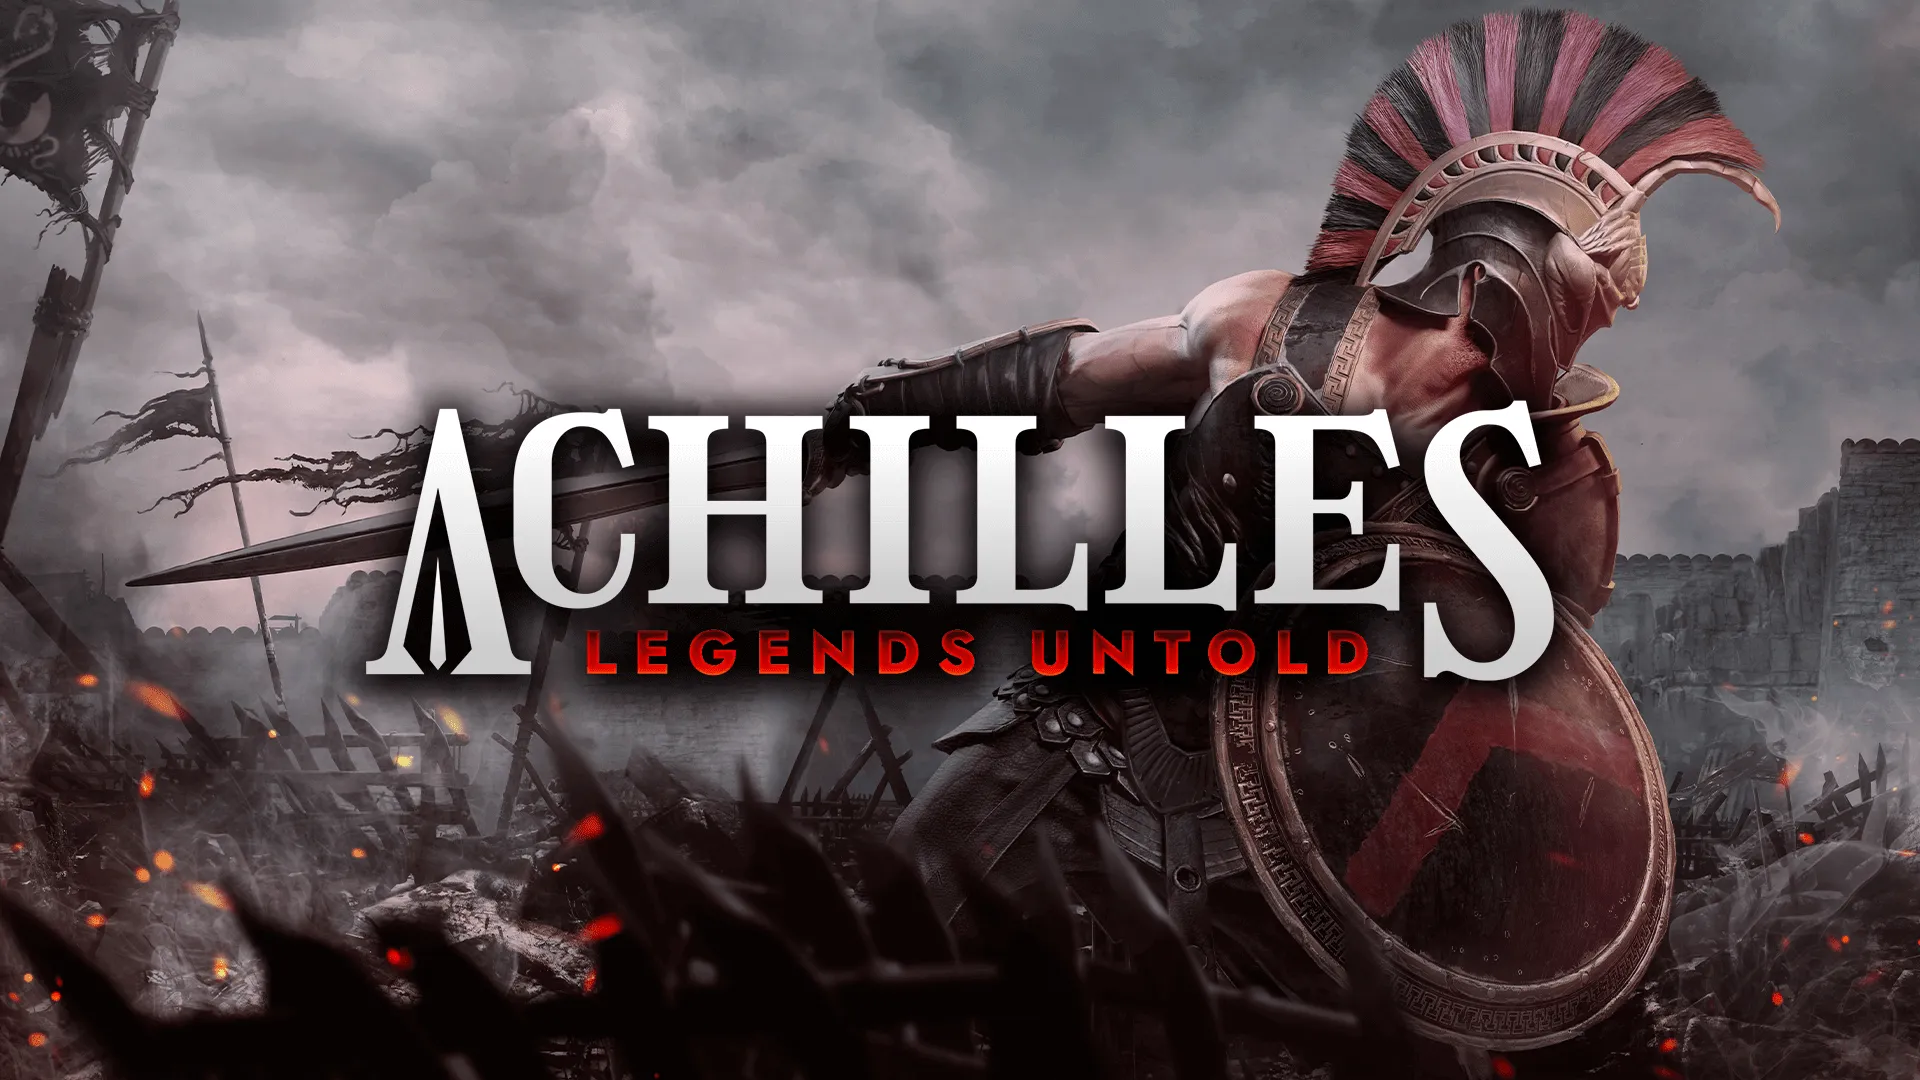 Achilles Legends Untold rog ally game settings